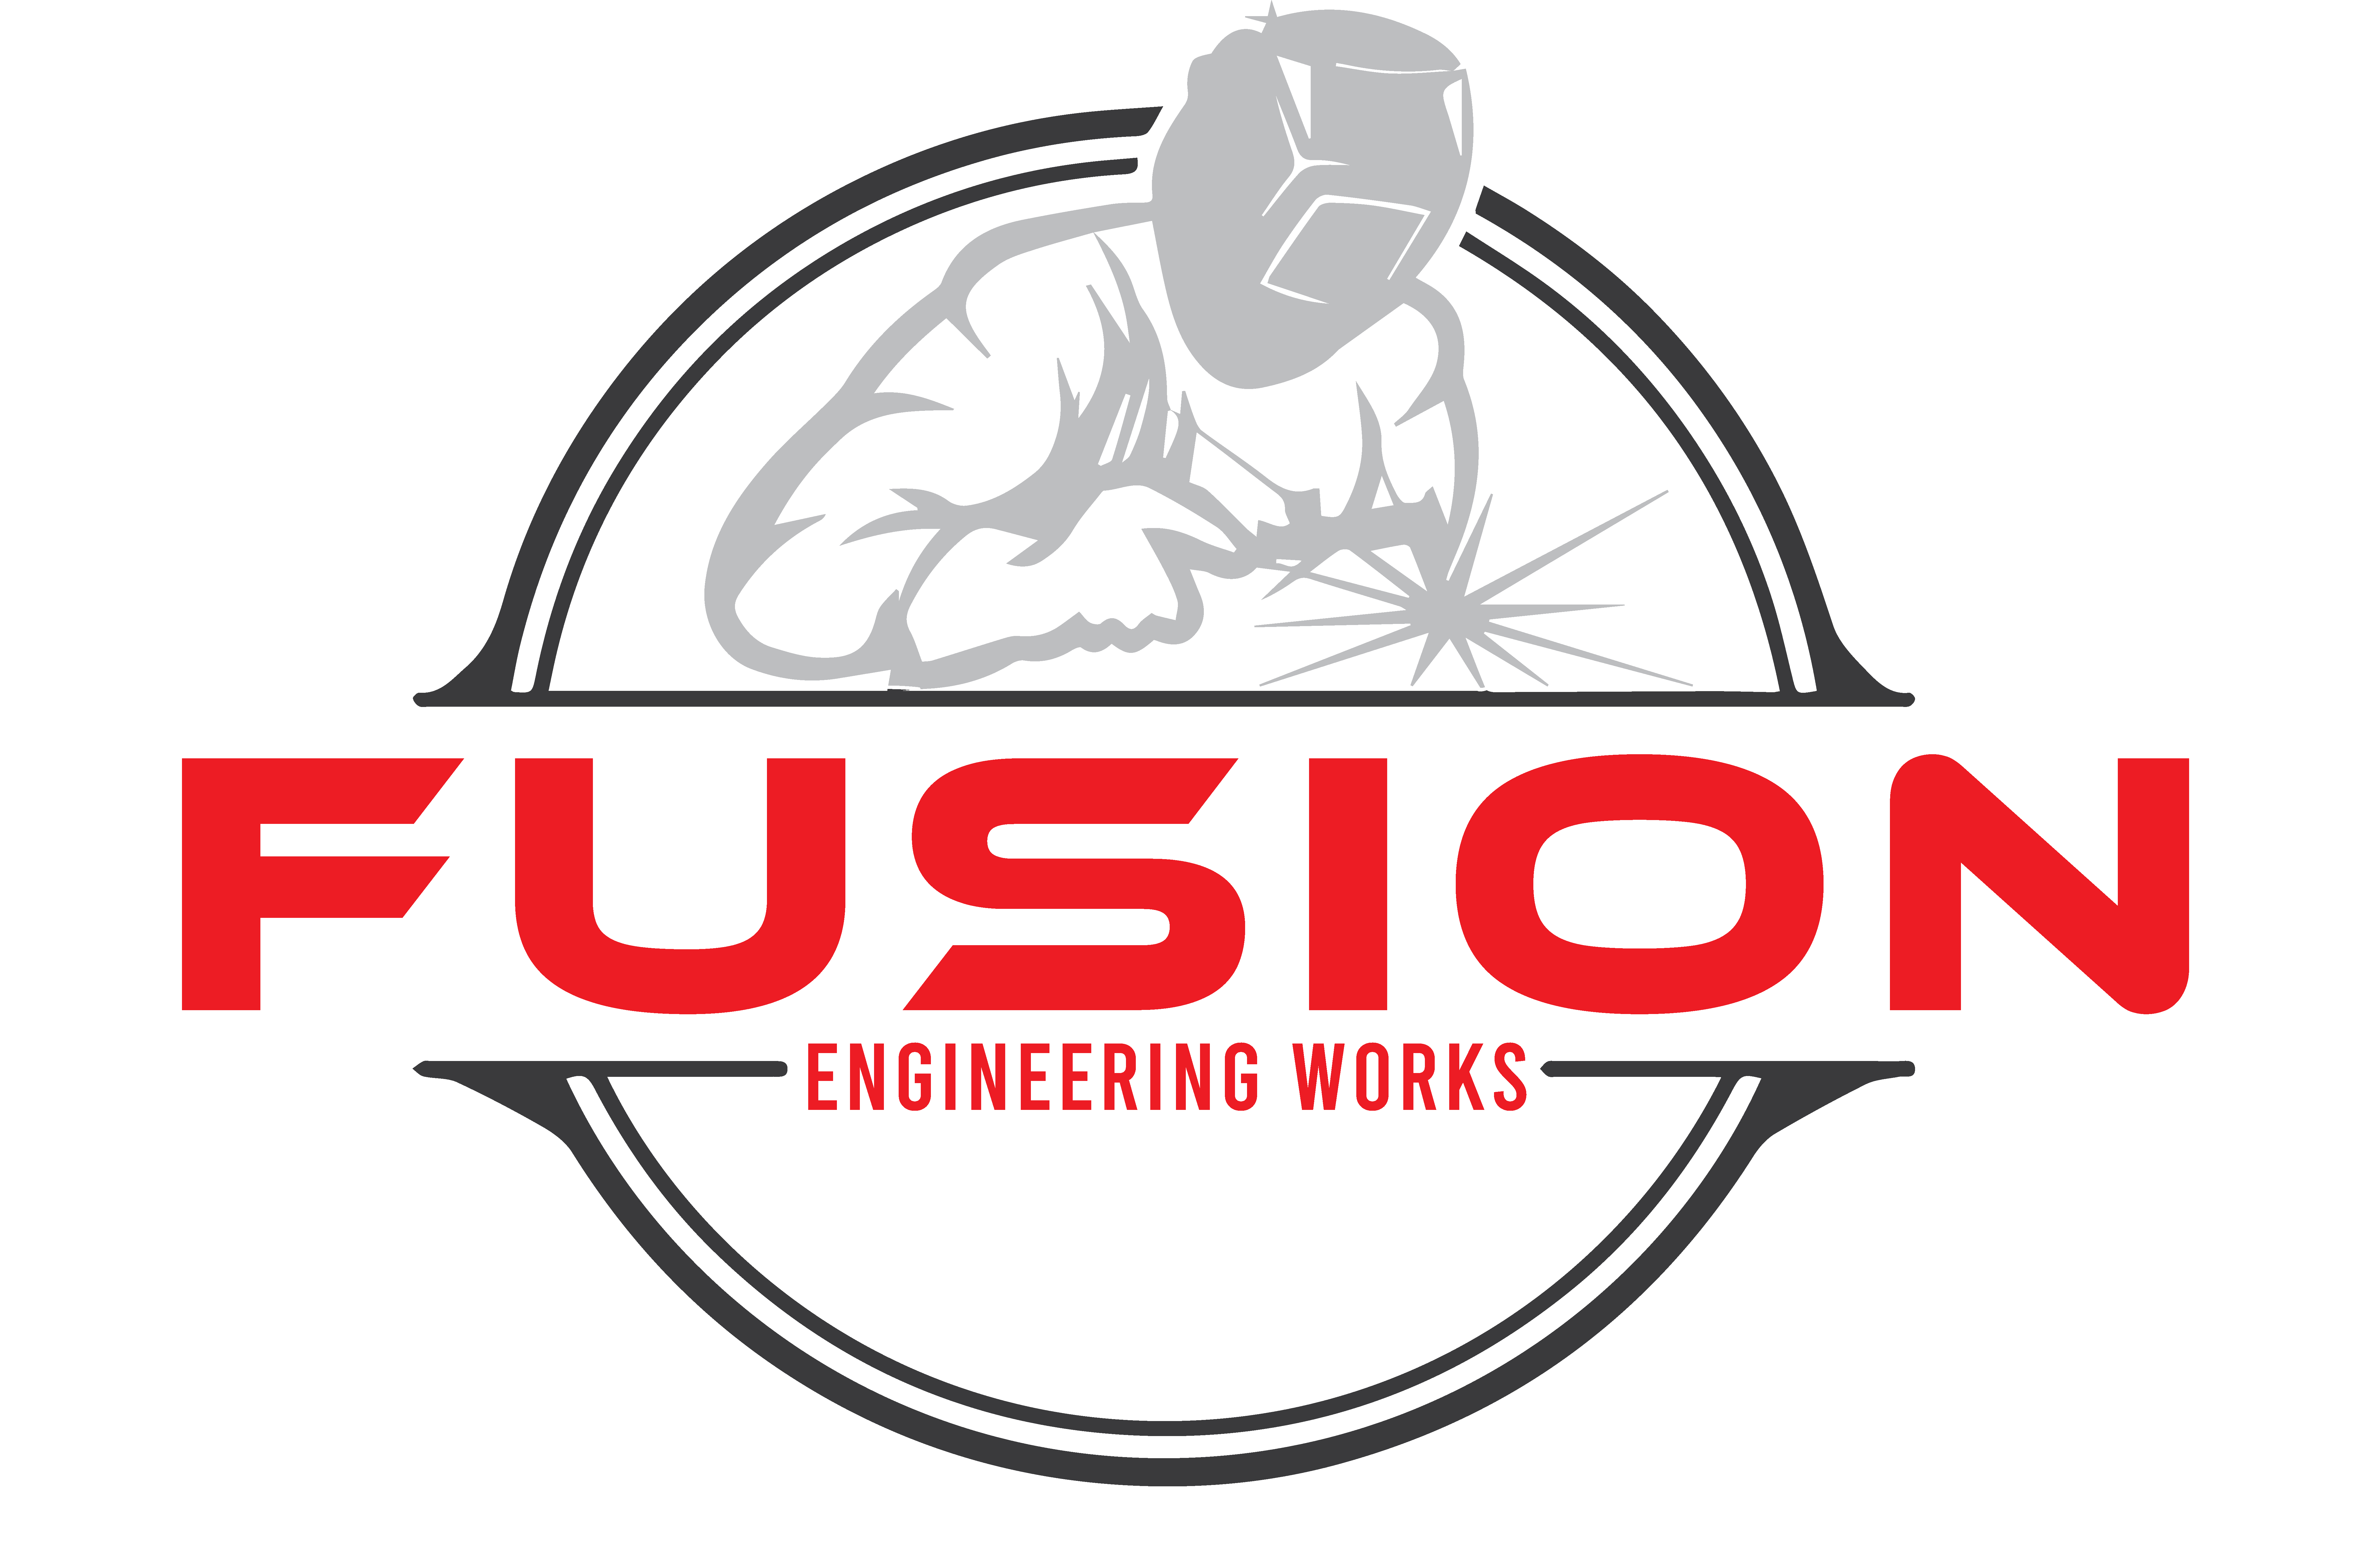 Fusion Engineering Works